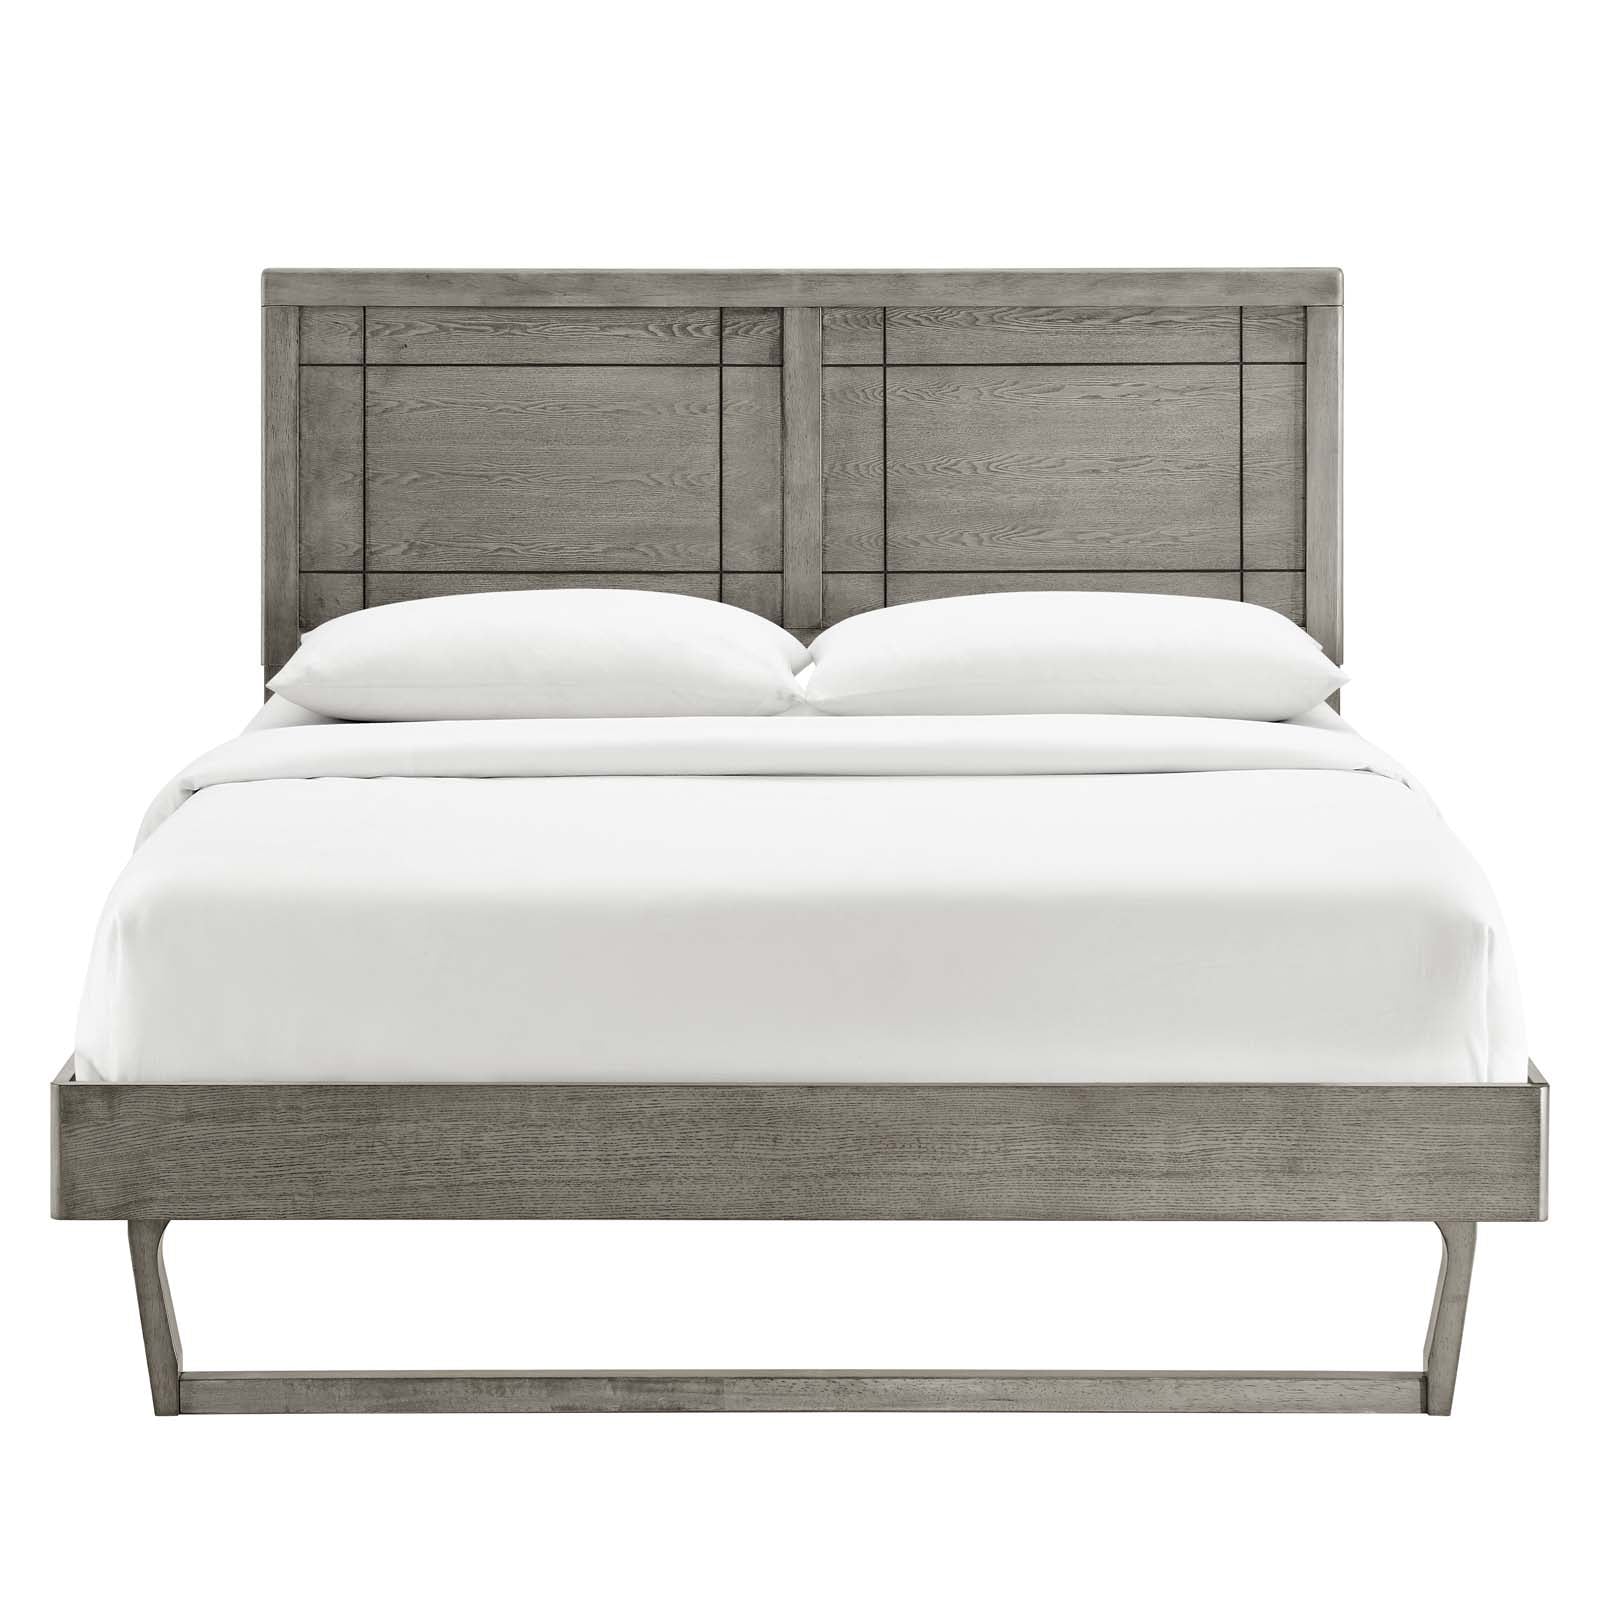 Modway Beds - Marlee Queen Wood Platform Bed With Angular Frame Gray